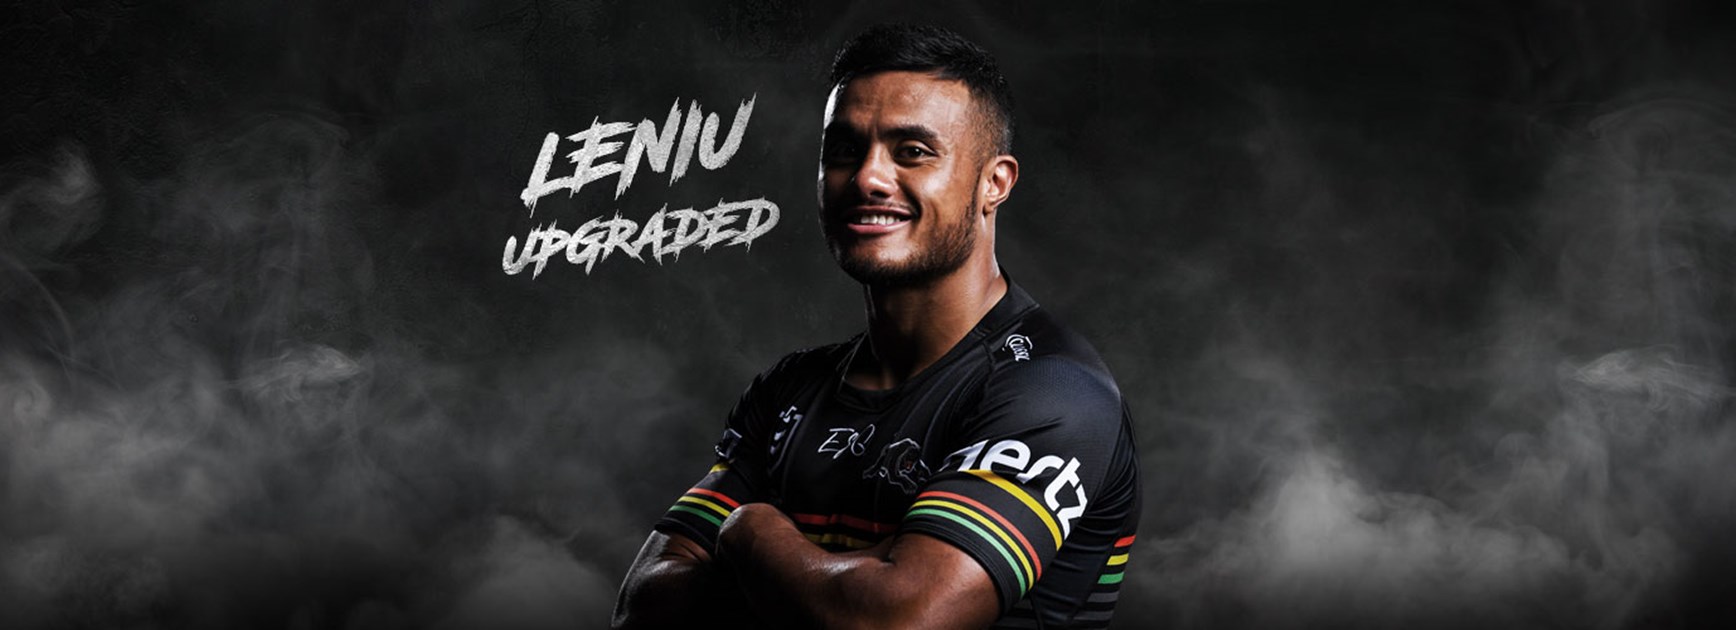 Leniu upgraded to complete Panthers roster